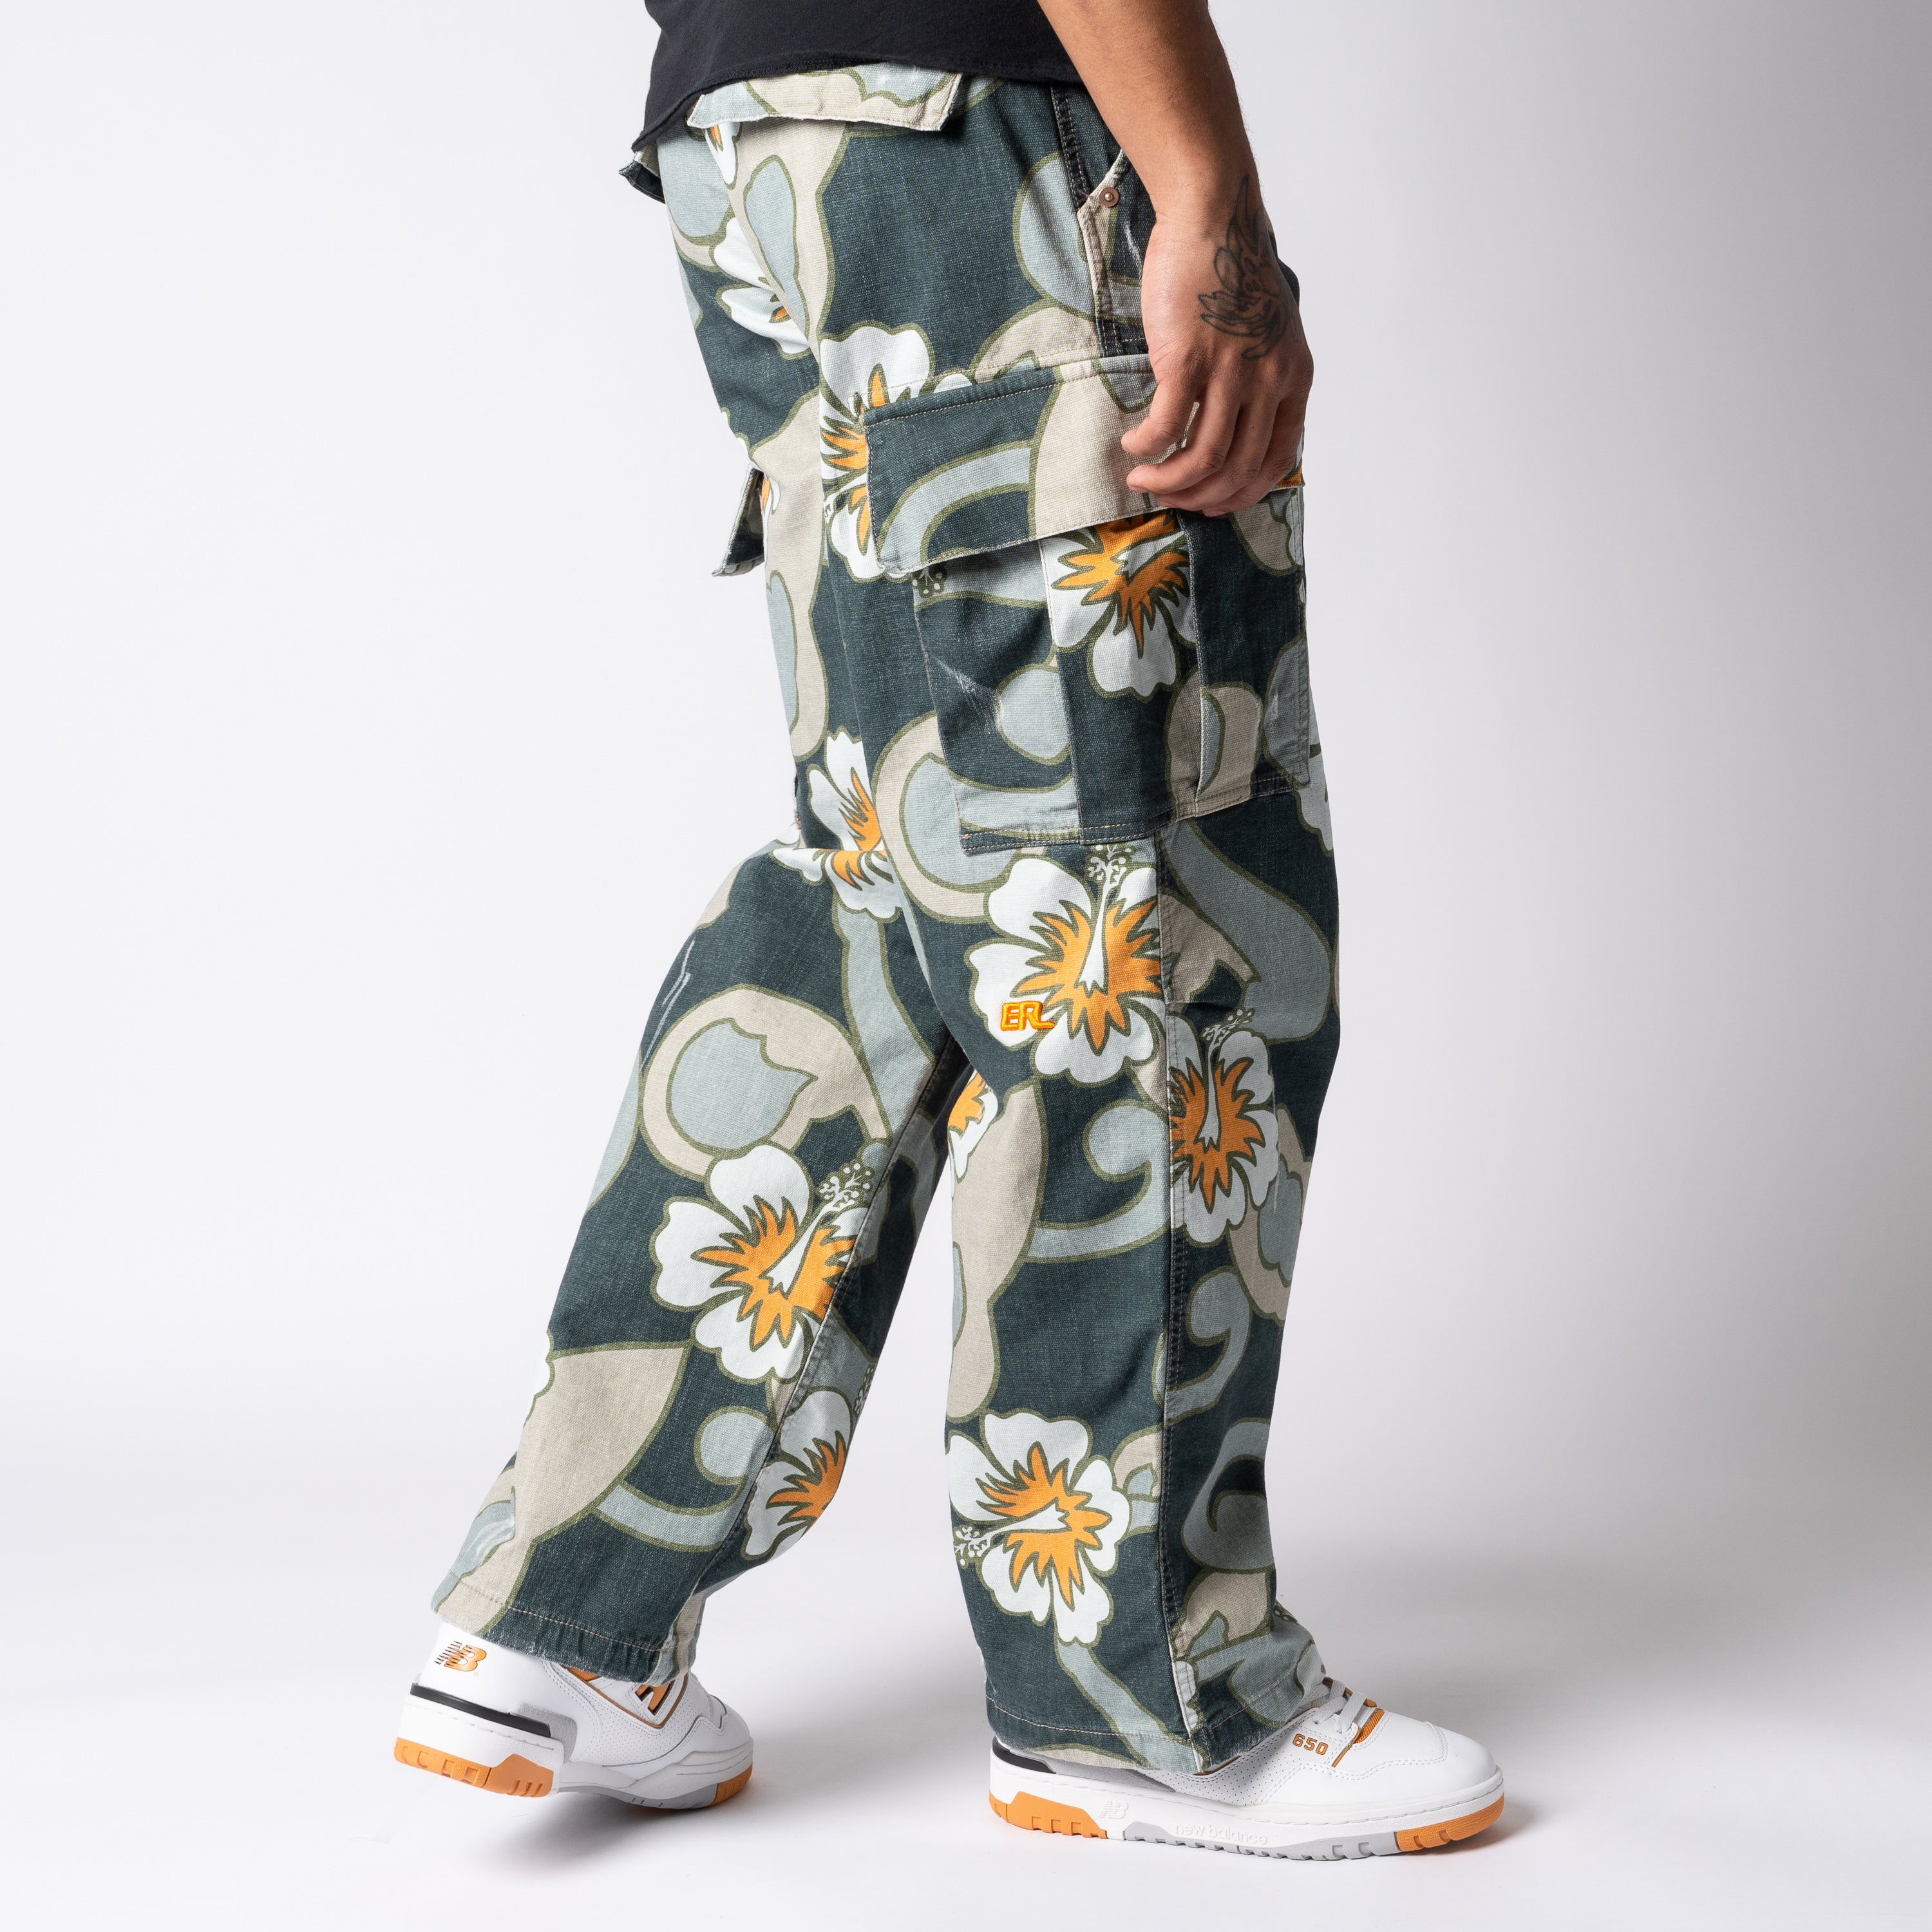 ERL Printed Cargo Pant Woven Grey